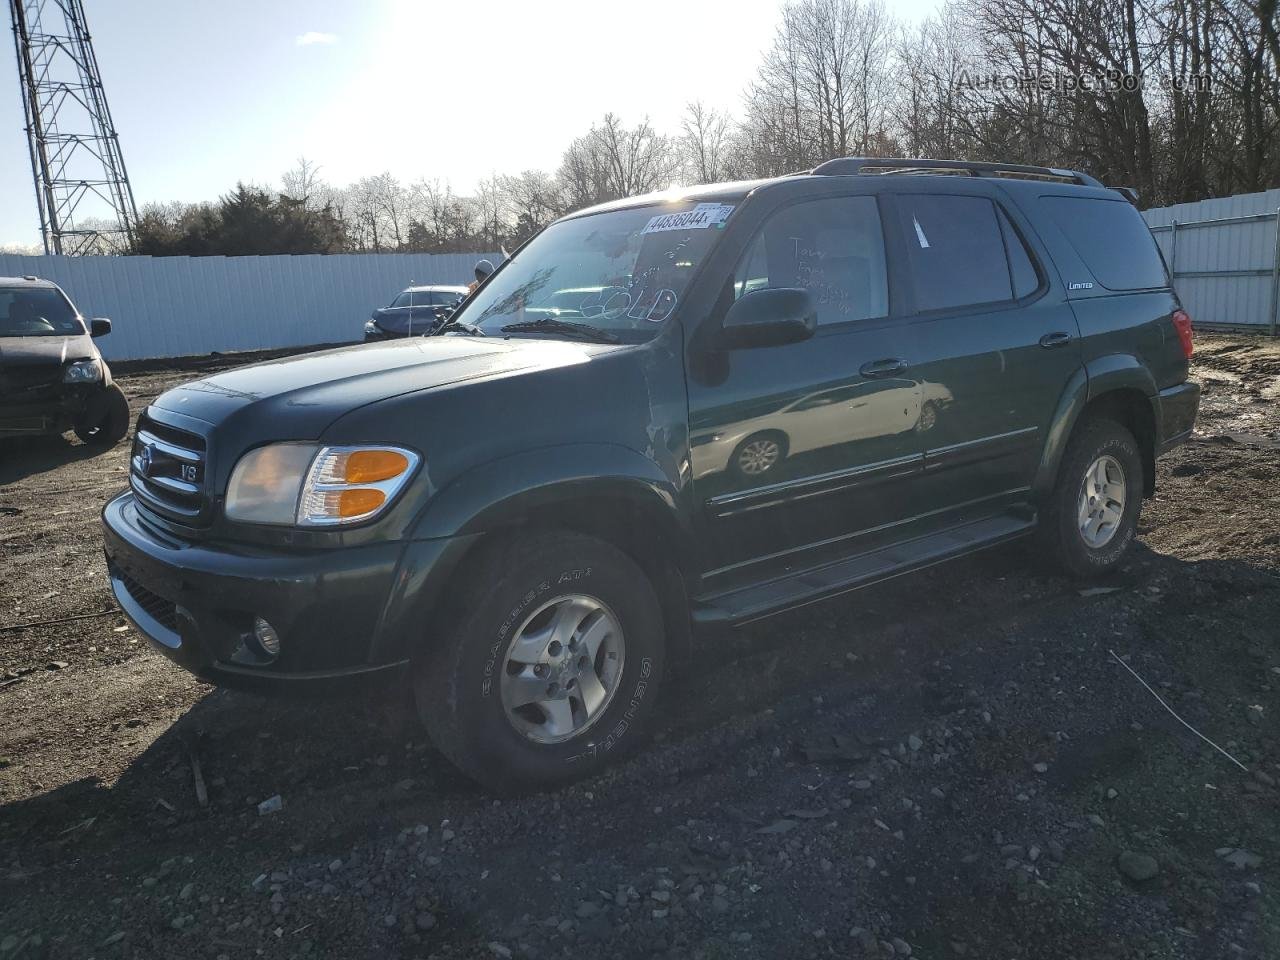 2002 Toyota Sequoia Limited Green vin: 5TDBT48A32S120766